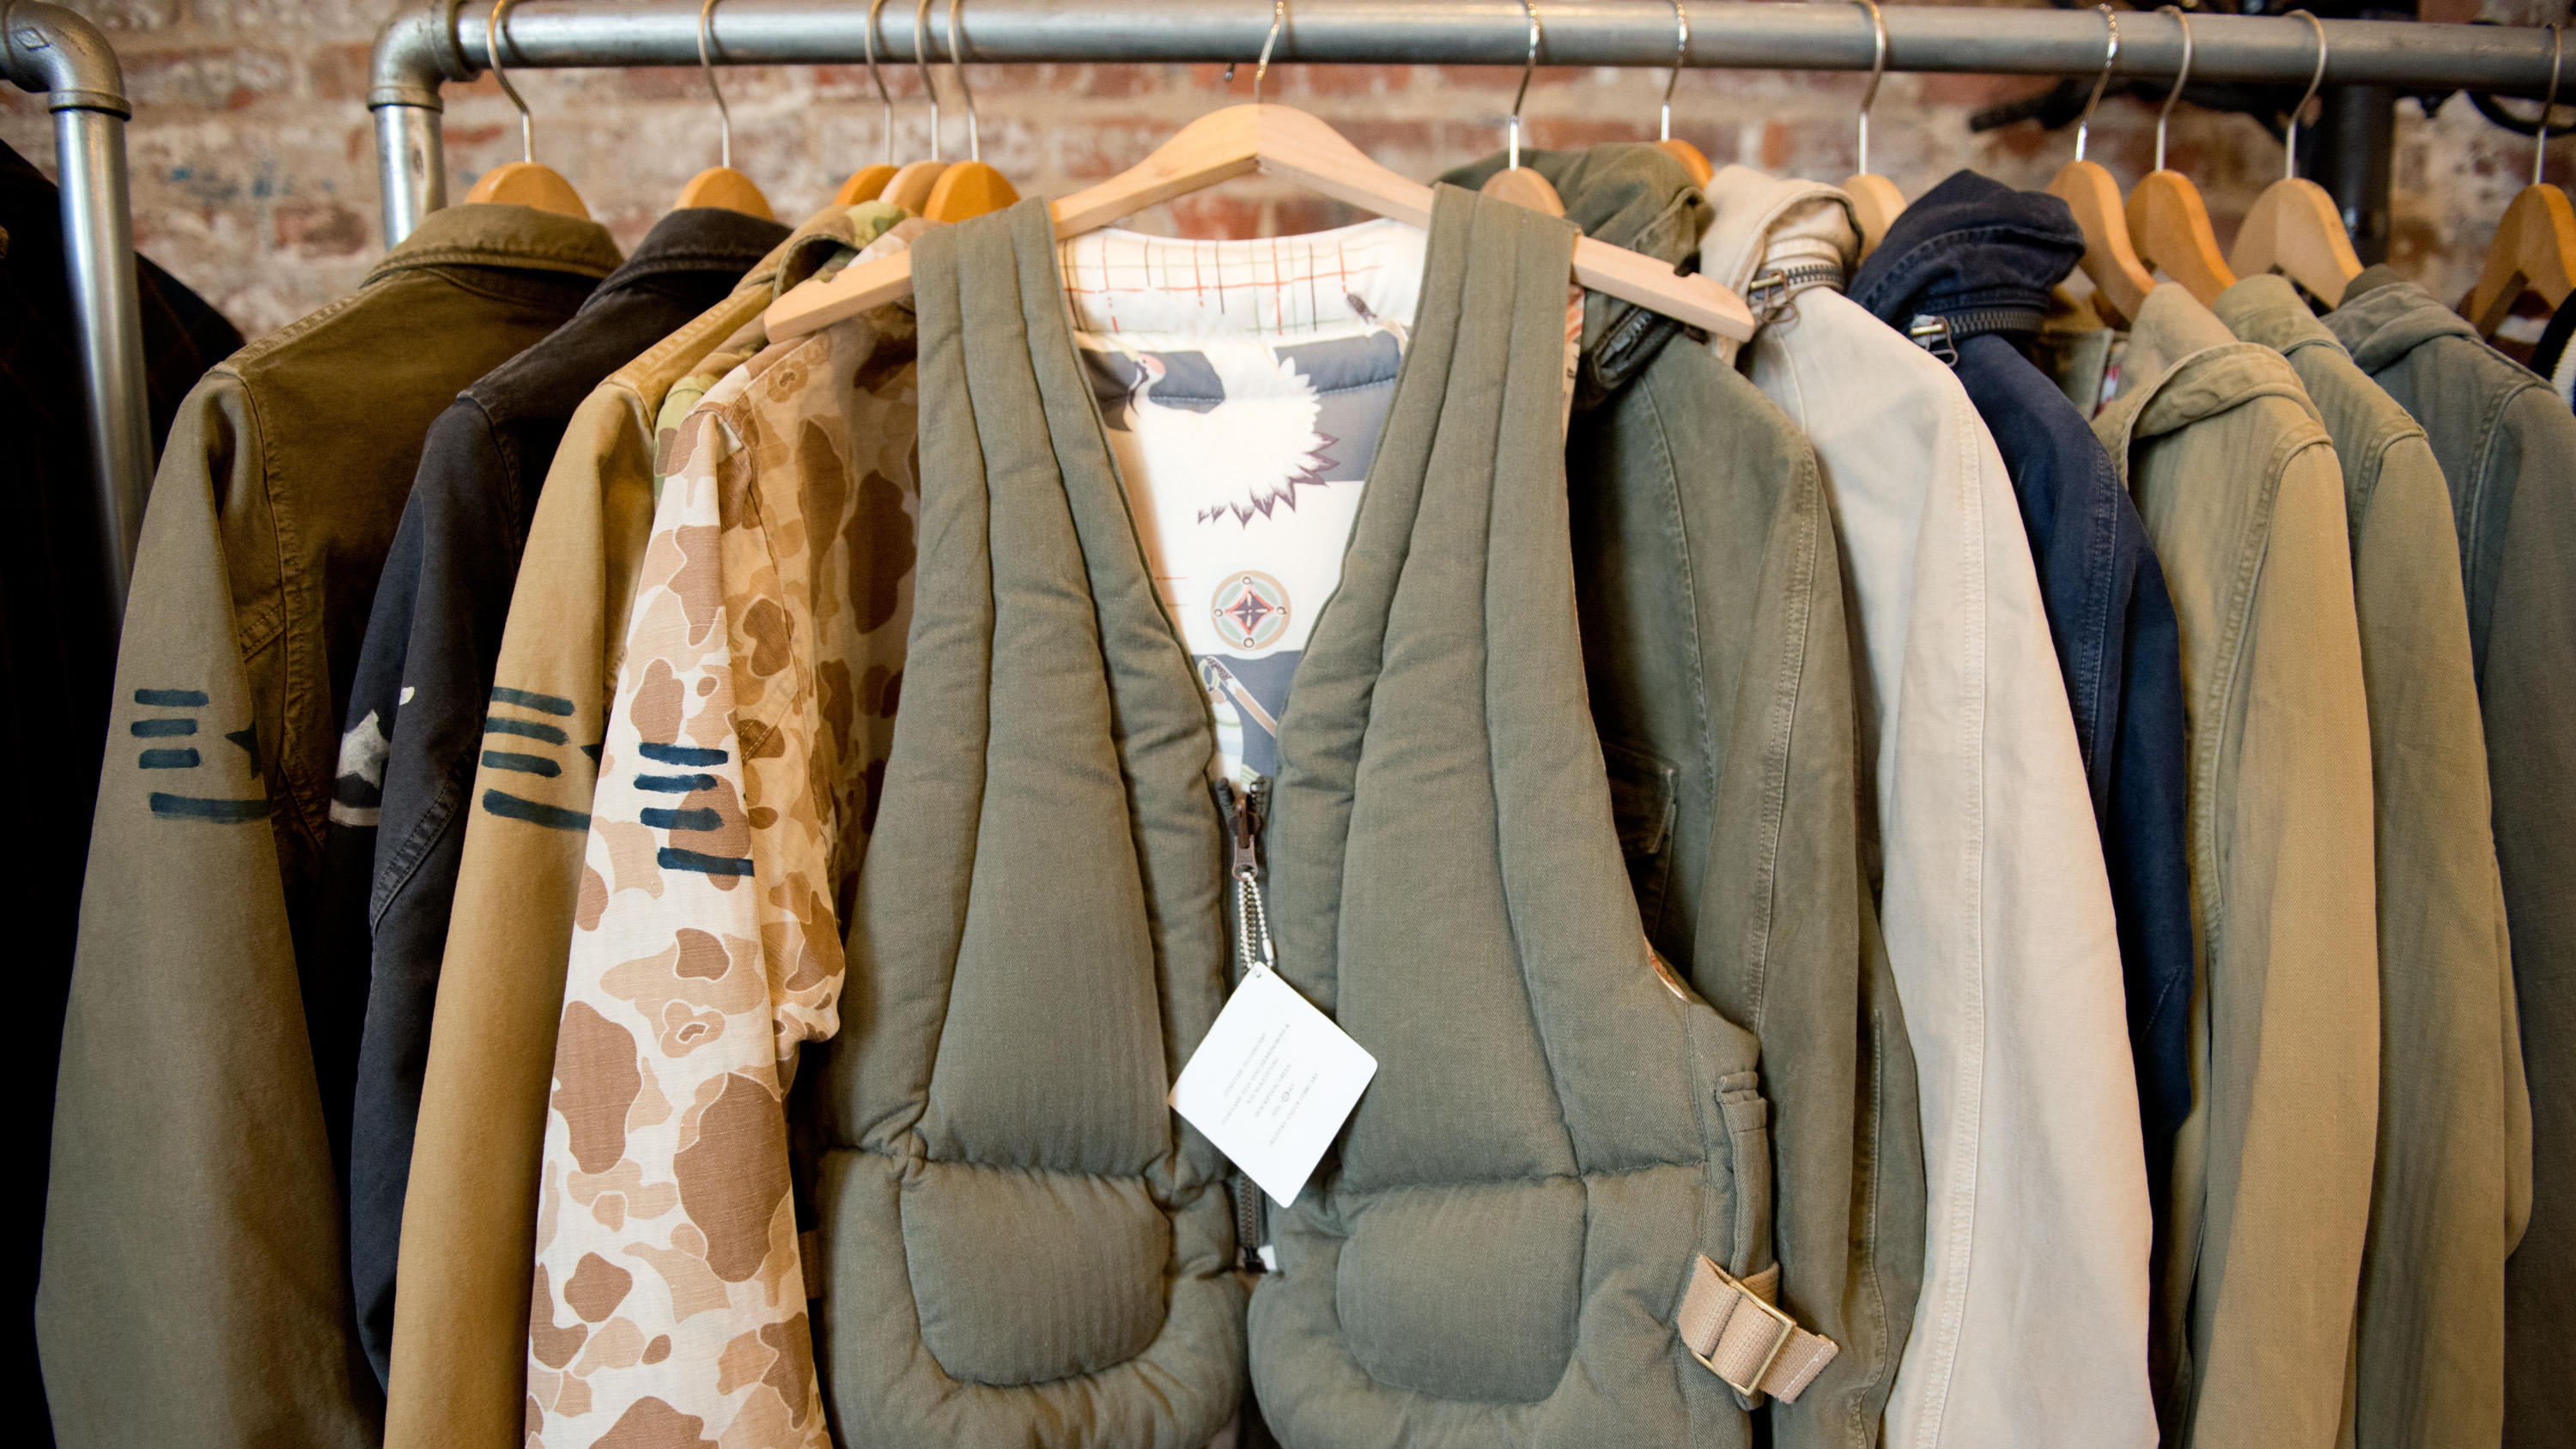 Military-inspired clothing from visvim's Spring 2015 collection  Source: Getty Images

